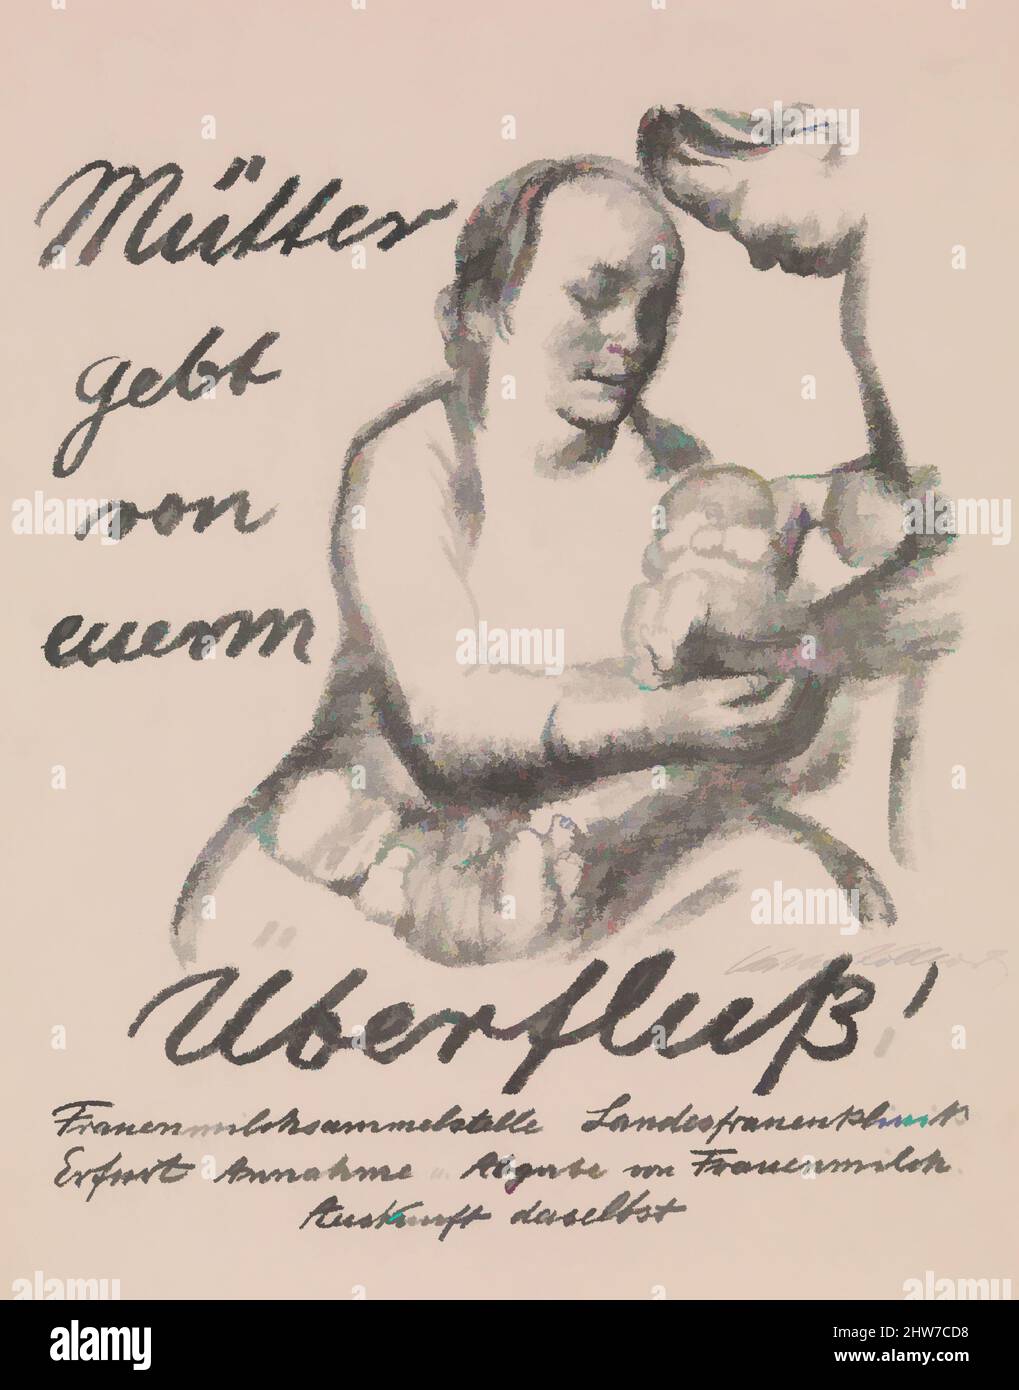 Art inspired by Mothers, Give from your Abundance (Mütter gebt von eurem Überfluss), 1926, Lithograph, sheet: 20 7/8 x 16 in. (53.1 x 40.7 cm), Prints, Käthe Kollwitz (German, Kaliningrad (Königsberg) 1867–1945 Moritzburg, Classic works modernized by Artotop with a splash of modernity. Shapes, color and value, eye-catching visual impact on art. Emotions through freedom of artworks in a contemporary way. A timeless message pursuing a wildly creative new direction. Artists turning to the digital medium and creating the Artotop NFT Stock Photo